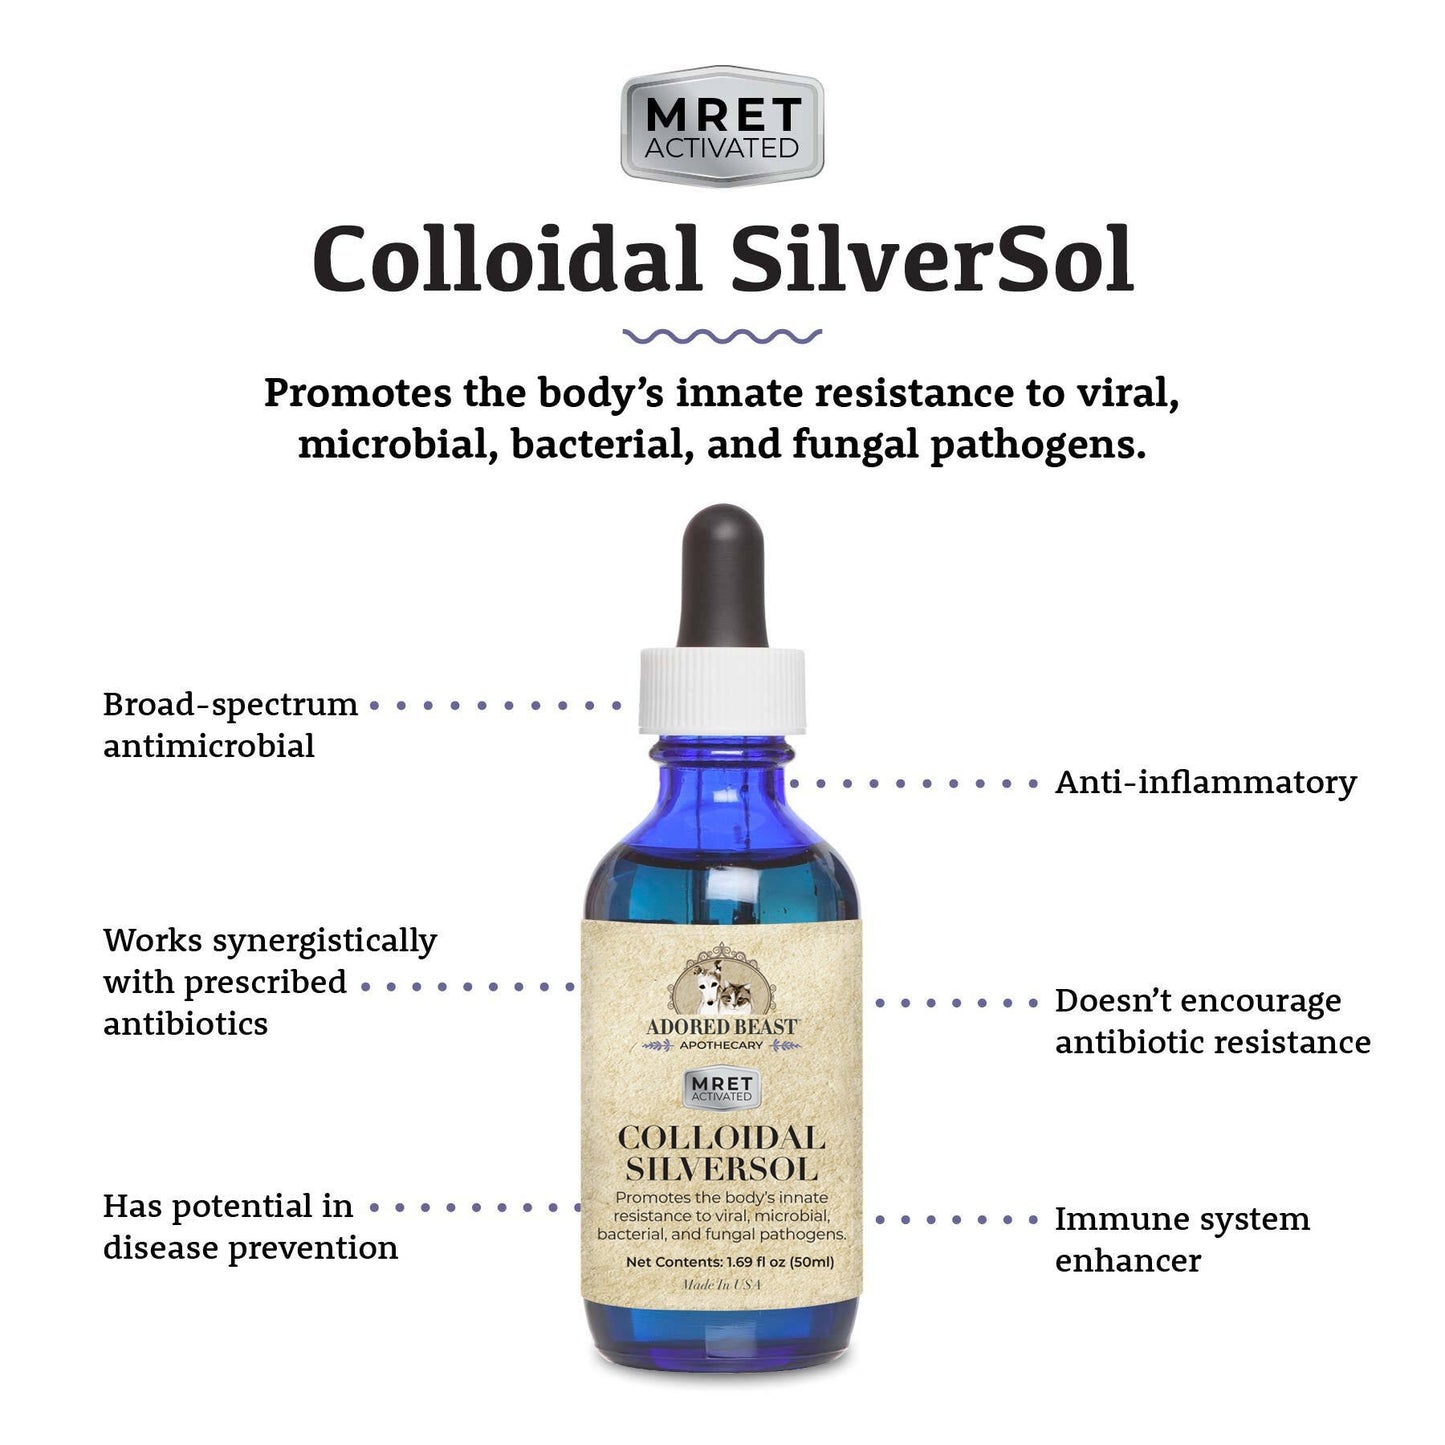 ADORED BEAST Collodial SilverSol (MRET Activated) 60ml